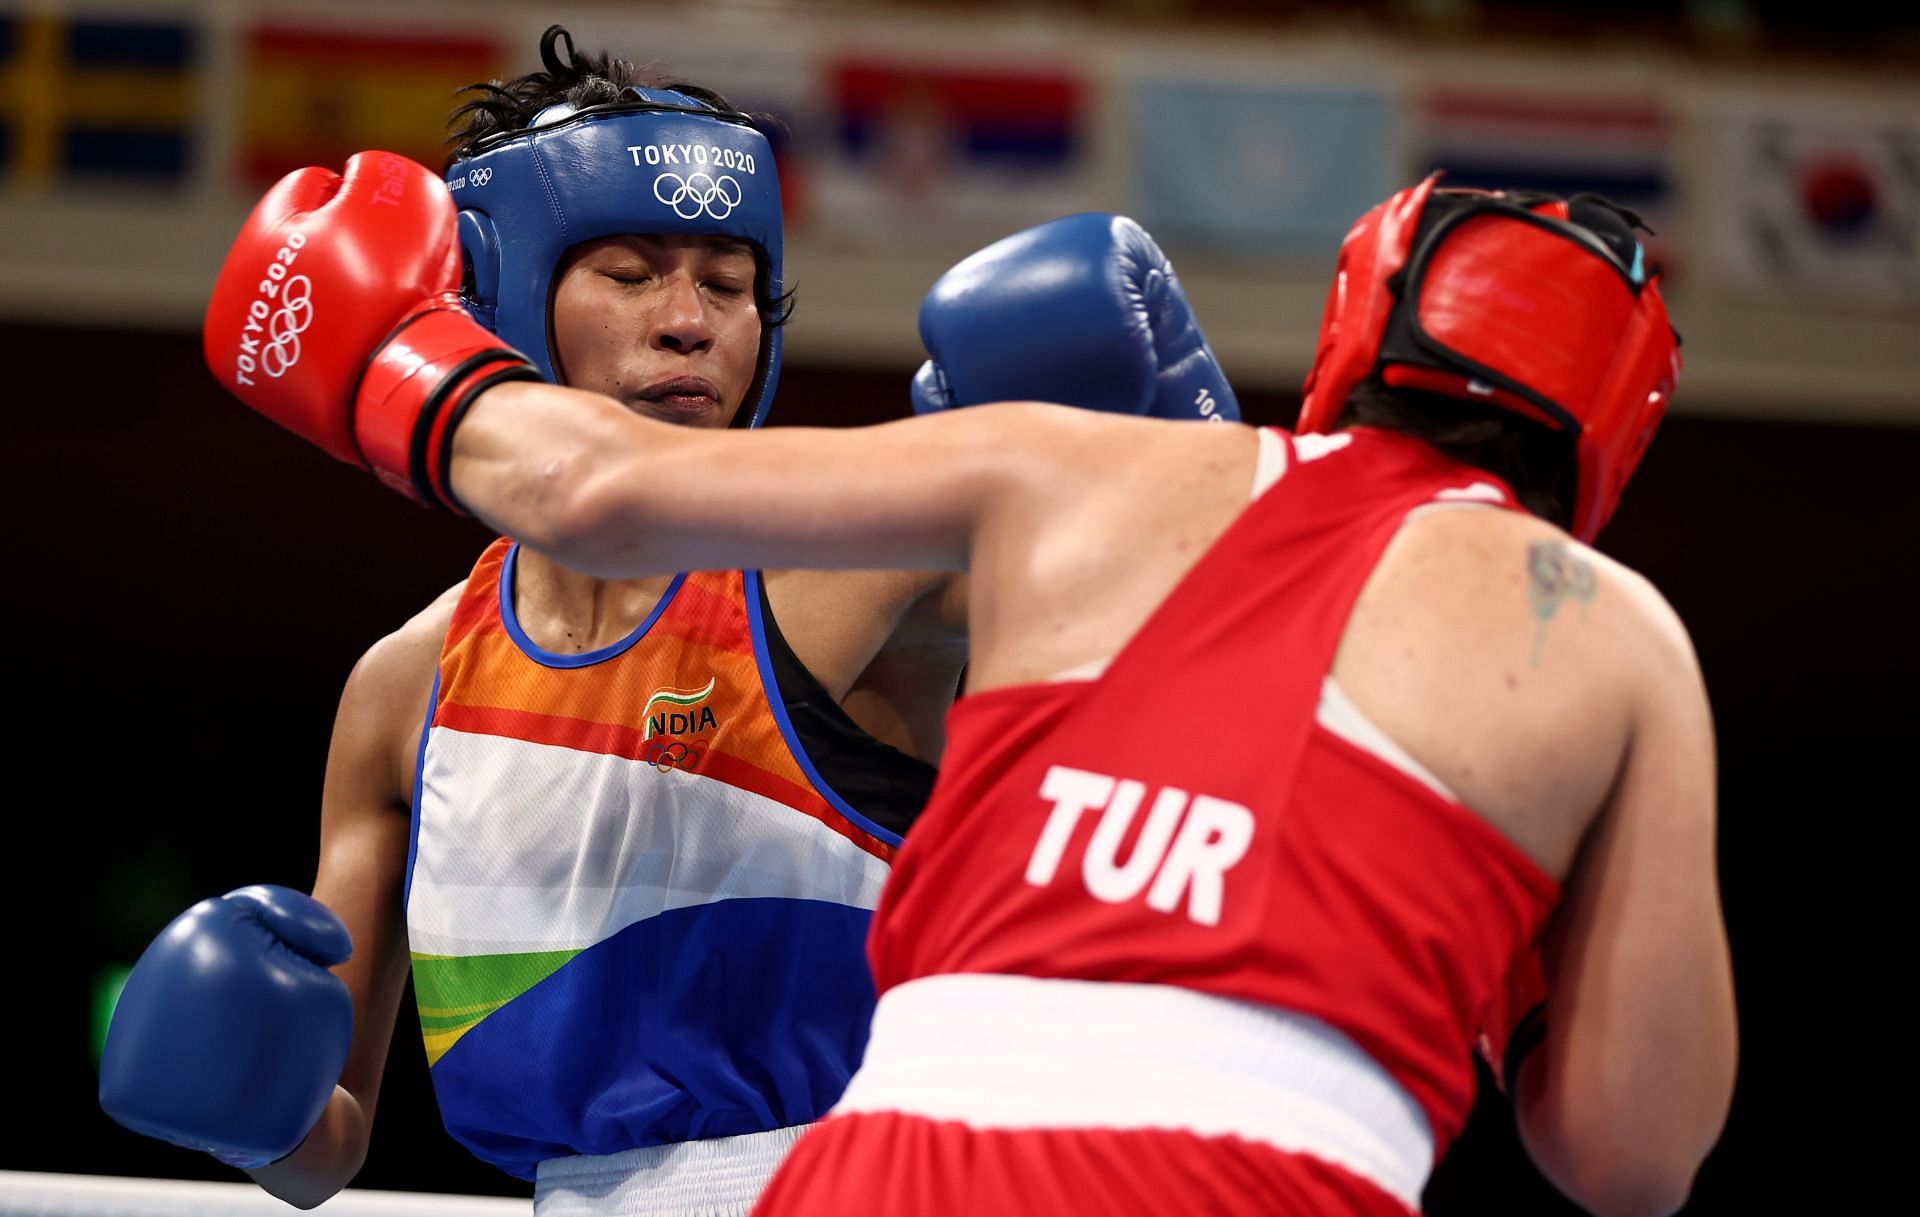 Indian boxer Lovlina Borgohain at the Tokyo Olympics. (PC: Getty Images)